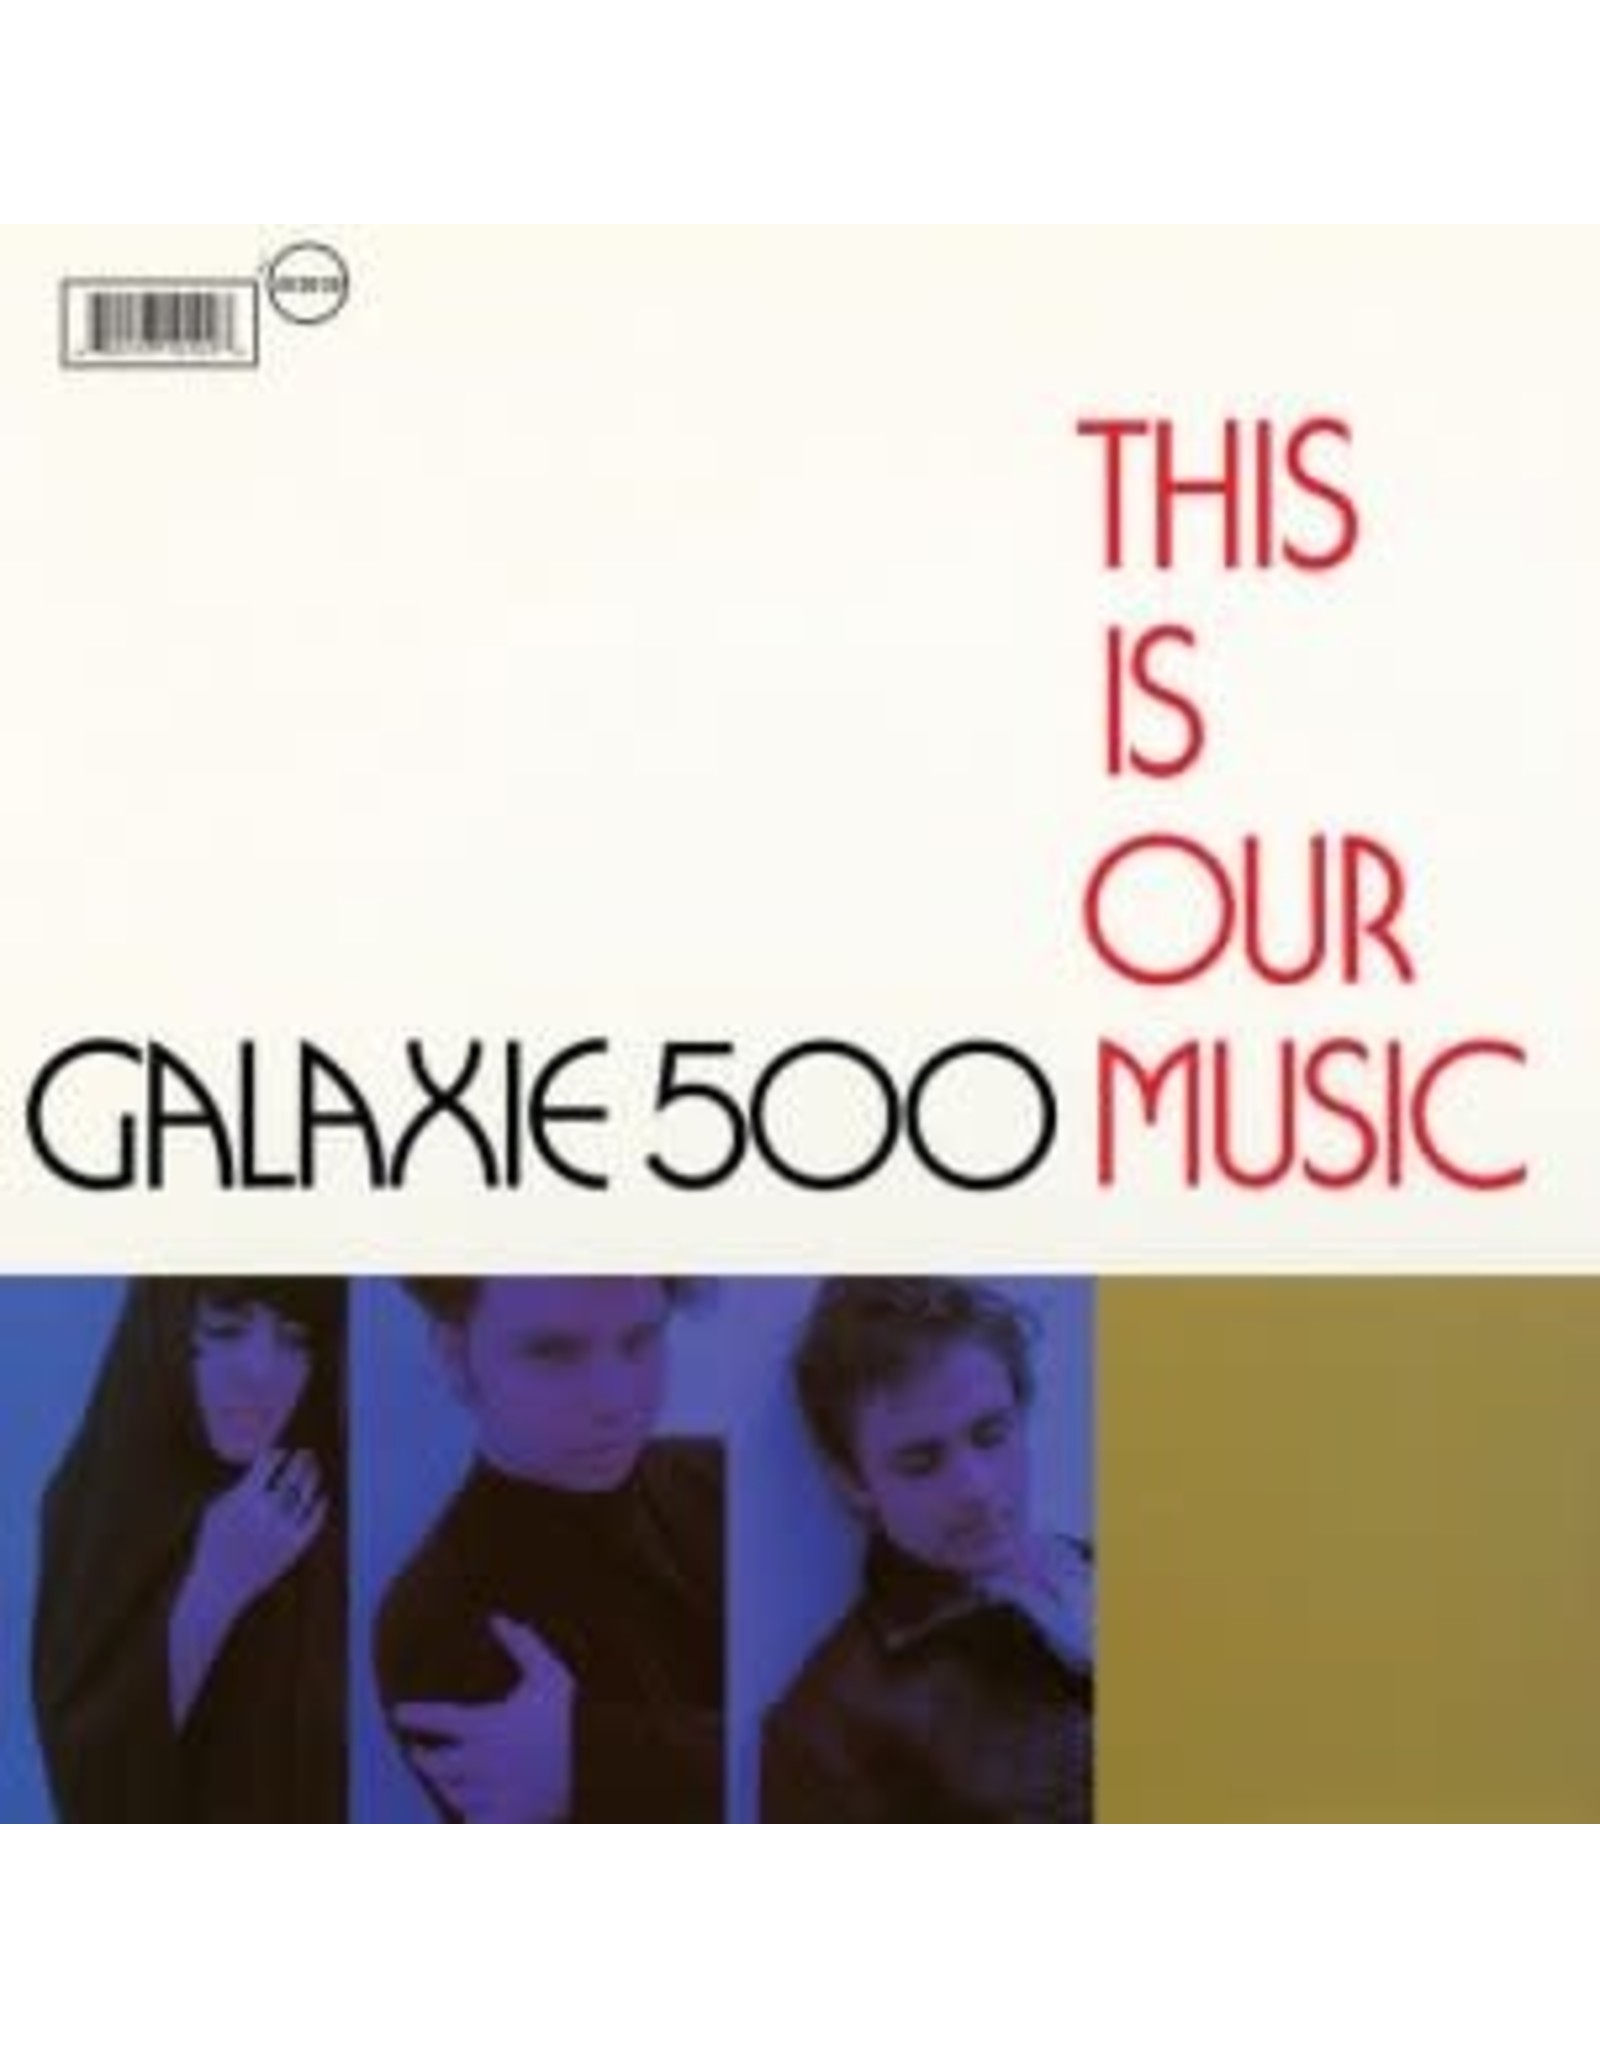 Galaxie 500: This Is Our Music LP